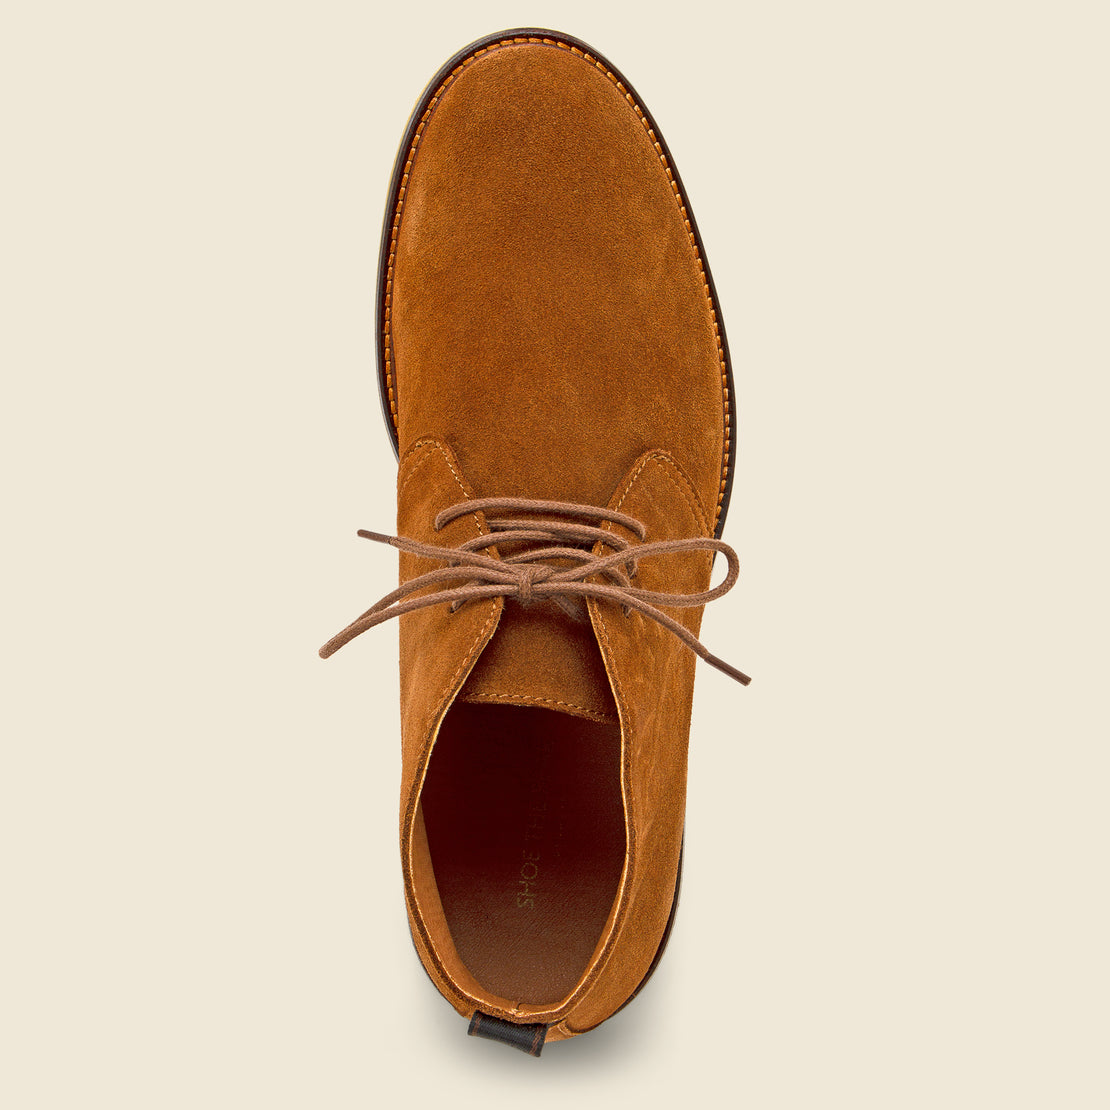 Kip Suede Chukka Boot - Tan - Shoe the Bear - STAG Provisions - Shoes - Boots / Chukkas